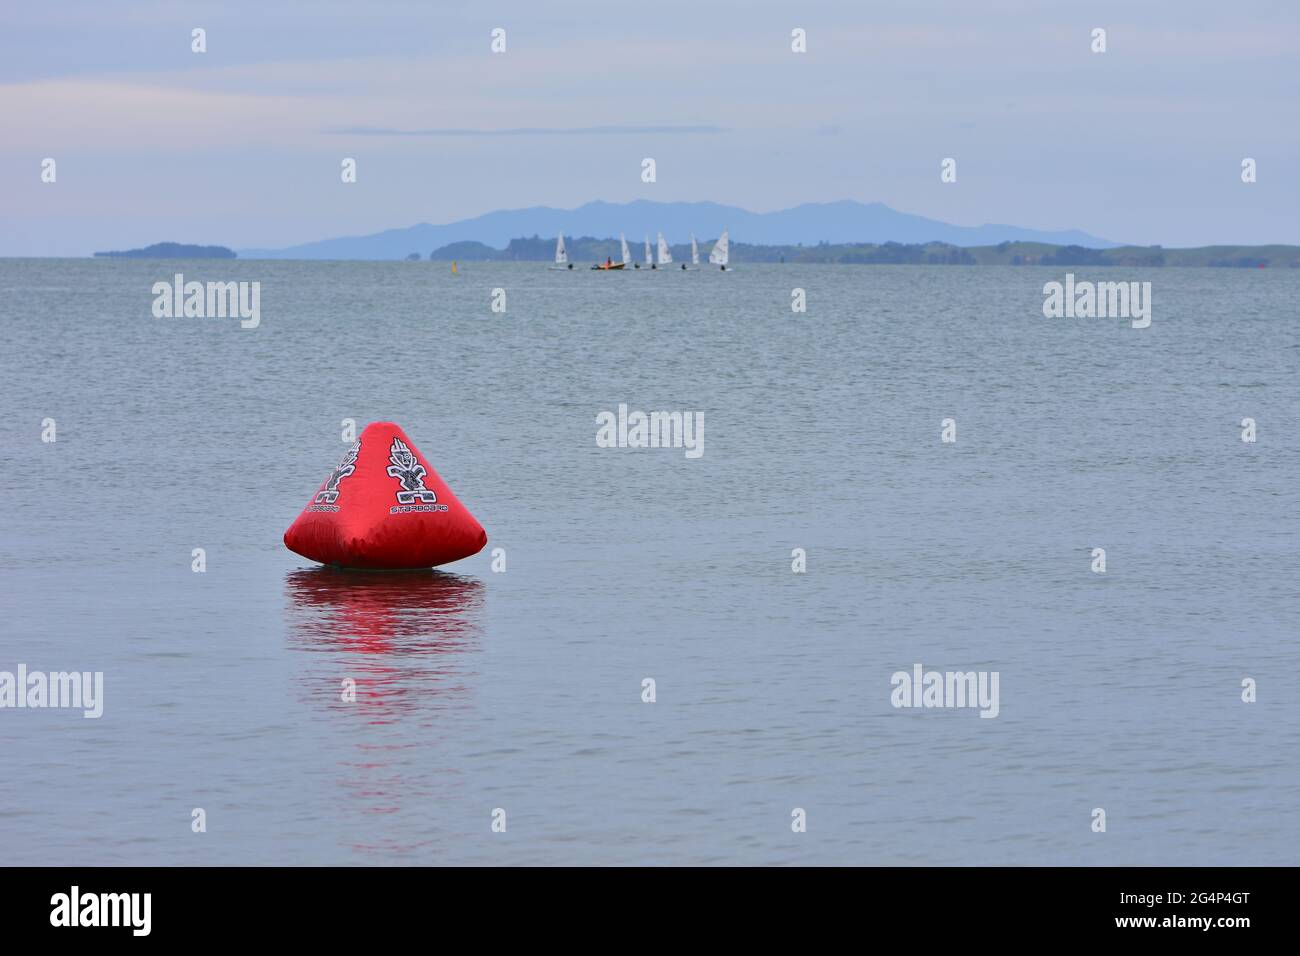 Red inflatable float on calm sea surface with sailing dinghies and support vessel in blurred background. Stock Photo